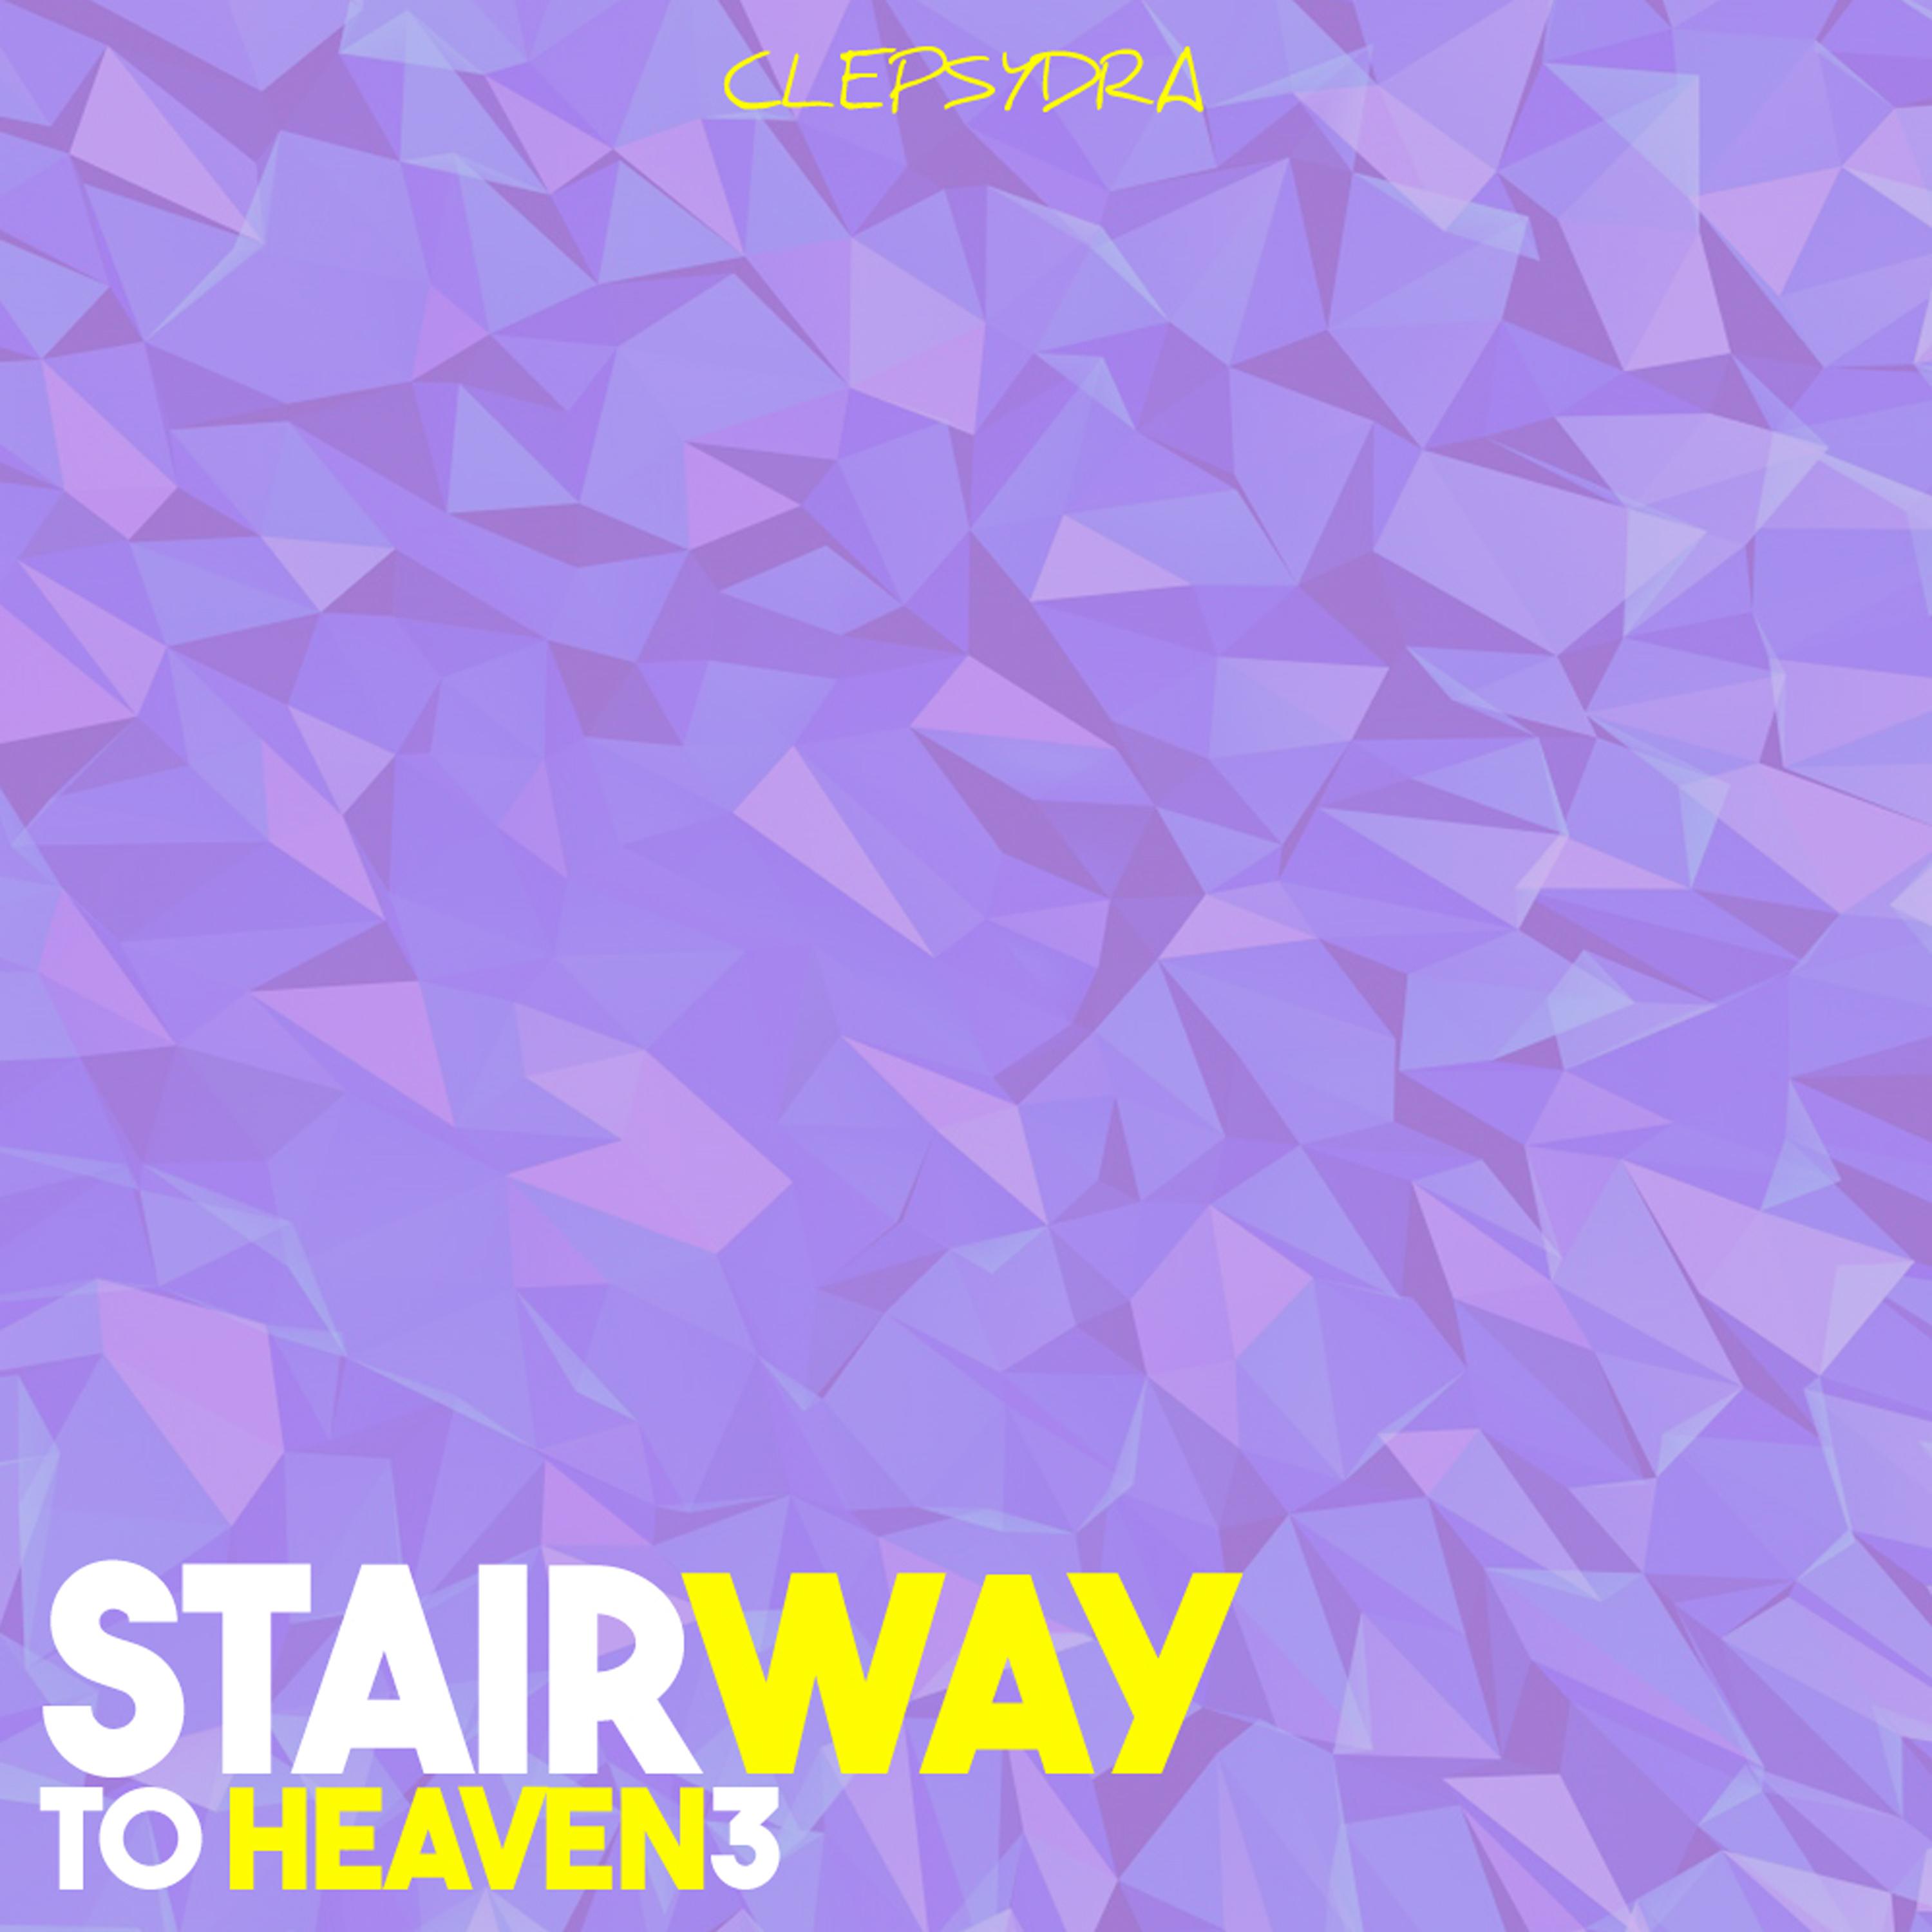 Stairway to Heaven 3